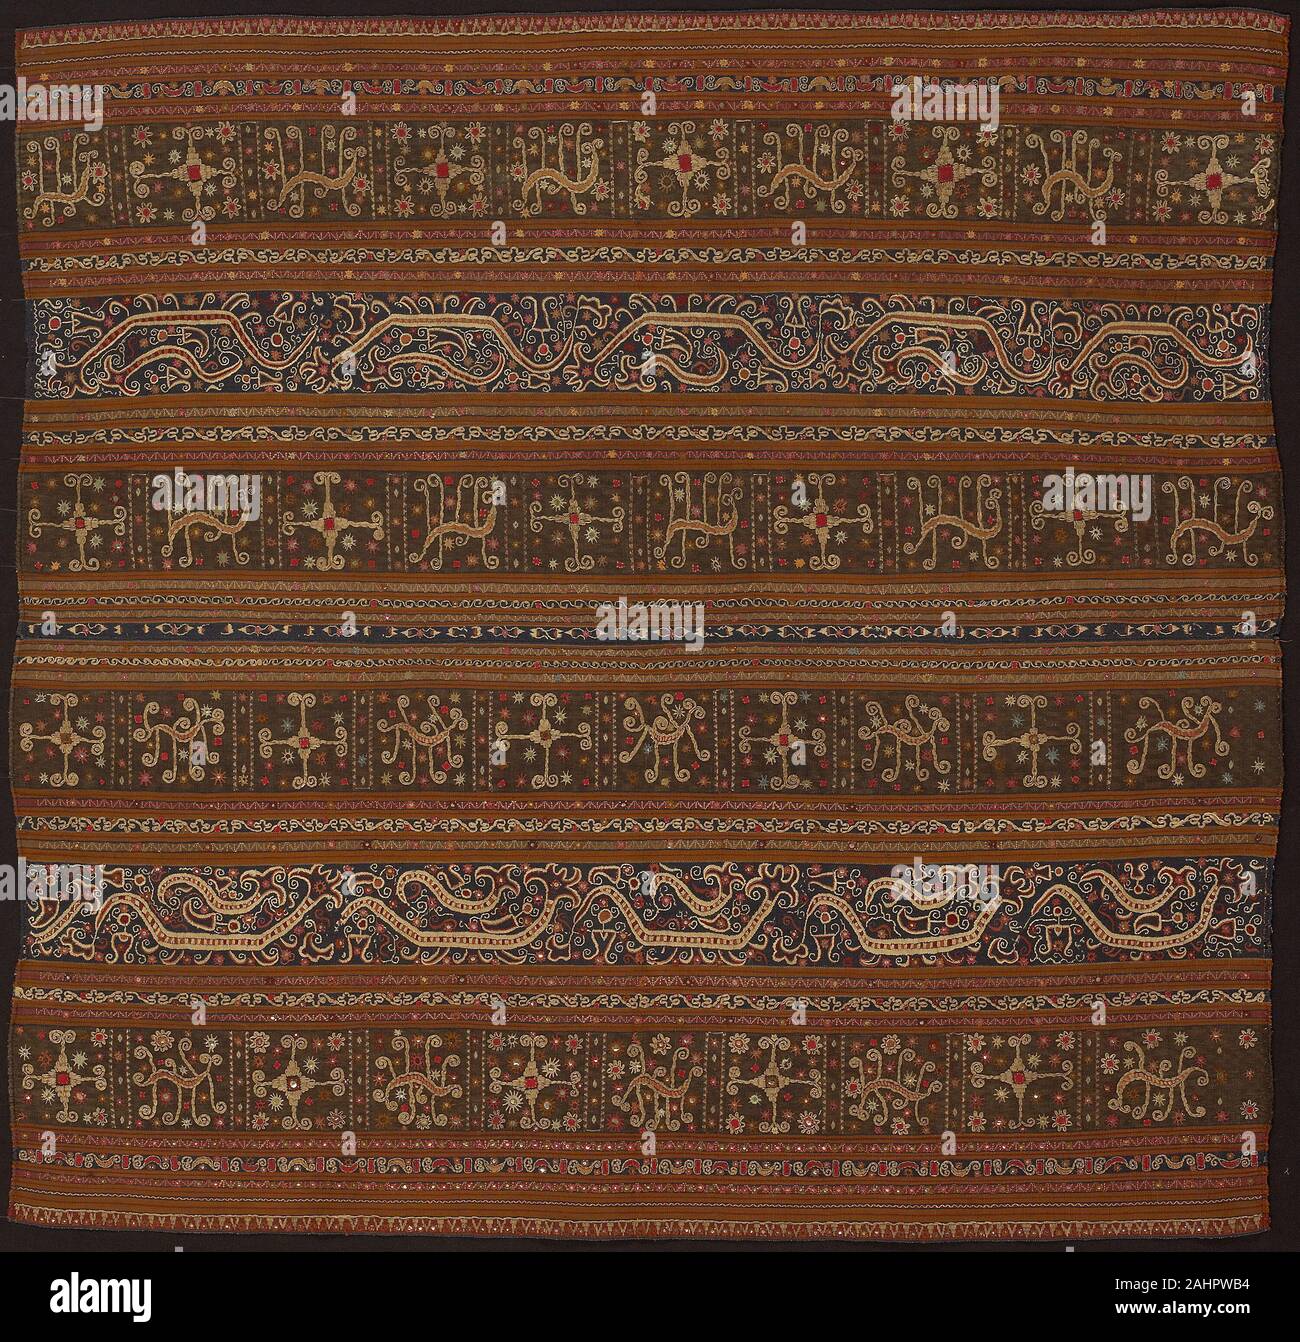 Abung. Ceremonial Skirt (tapis). 1801–1825. Indonesia. Two panels joined cotton and silk, stripes of warp-faced, weft ribbed plain weave; warp-faced, weft ribbed plain weave with supplementary brocading wefts, and warp resist dyed (warp ikat) plain weave with supplementary brocading wefts; appliquéd with wool, plain weave; embroidered with silk, cotton, pineapple fiber, silver-leaf-over-lacquered-paper strip wrapped cotton and silver-leaf-over-lacquered-paper strip wrapped bast fiber (probably ramie) in buttonhole, double running, split, stem, straight and surface satin; laidwork and couching; Stock Photo